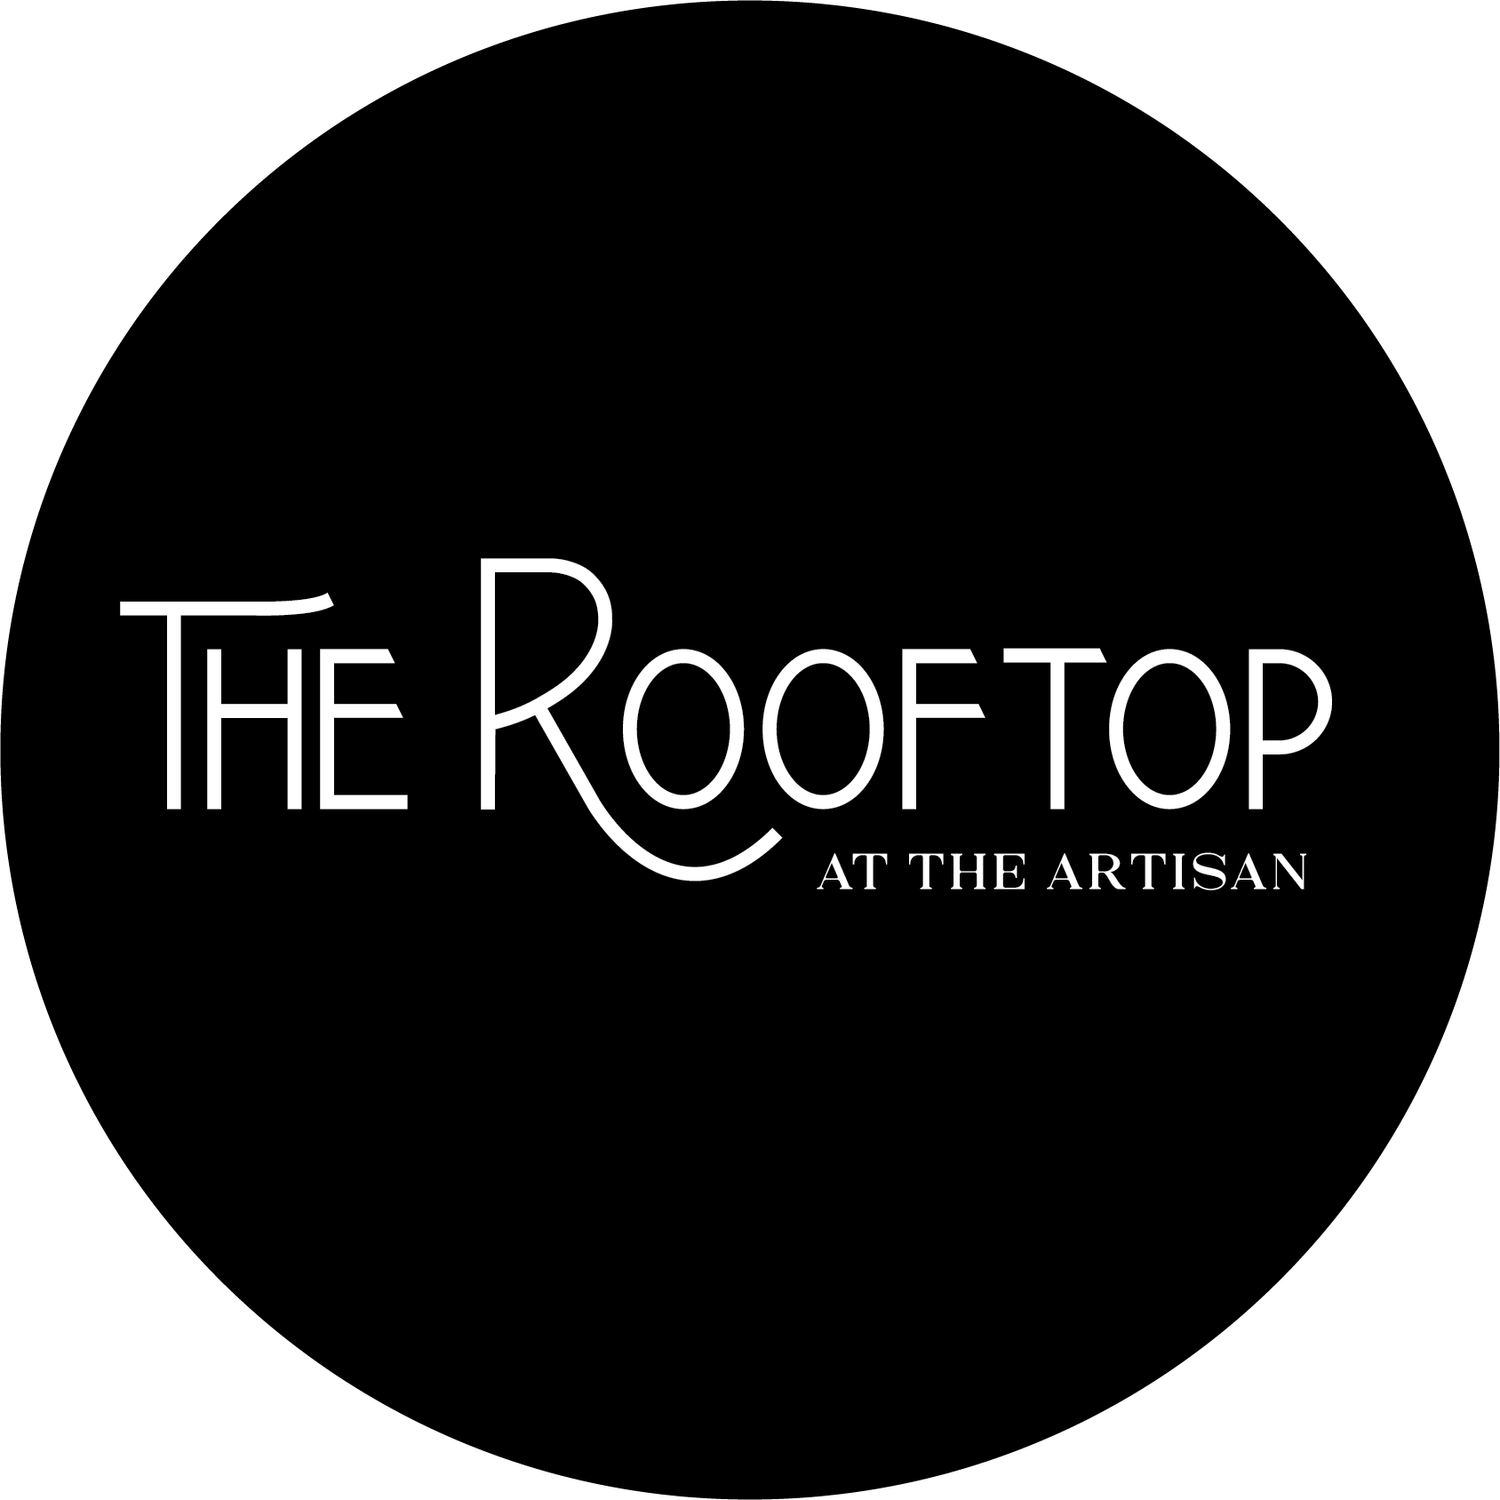 The Rooftop at The Artisan